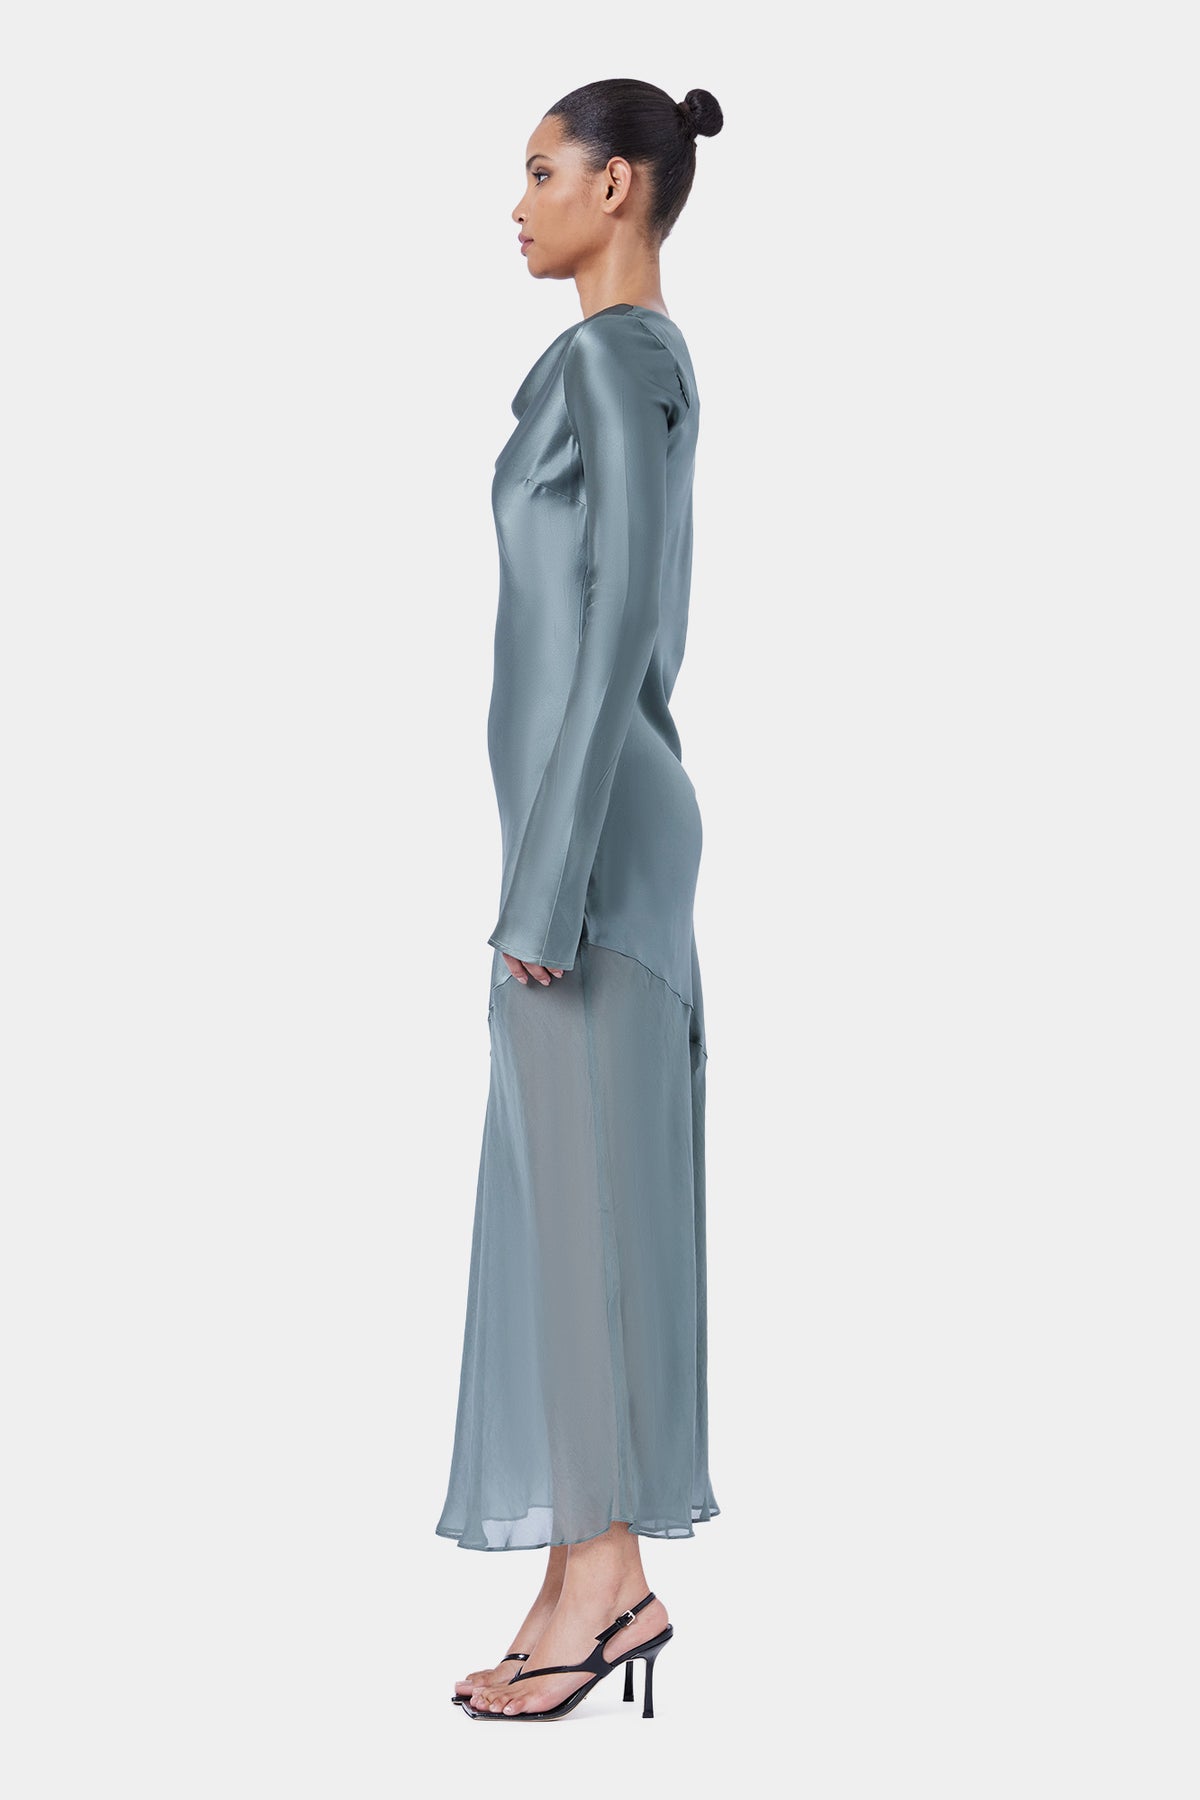 The Asym Splice LS Dress By GINIA In Moss